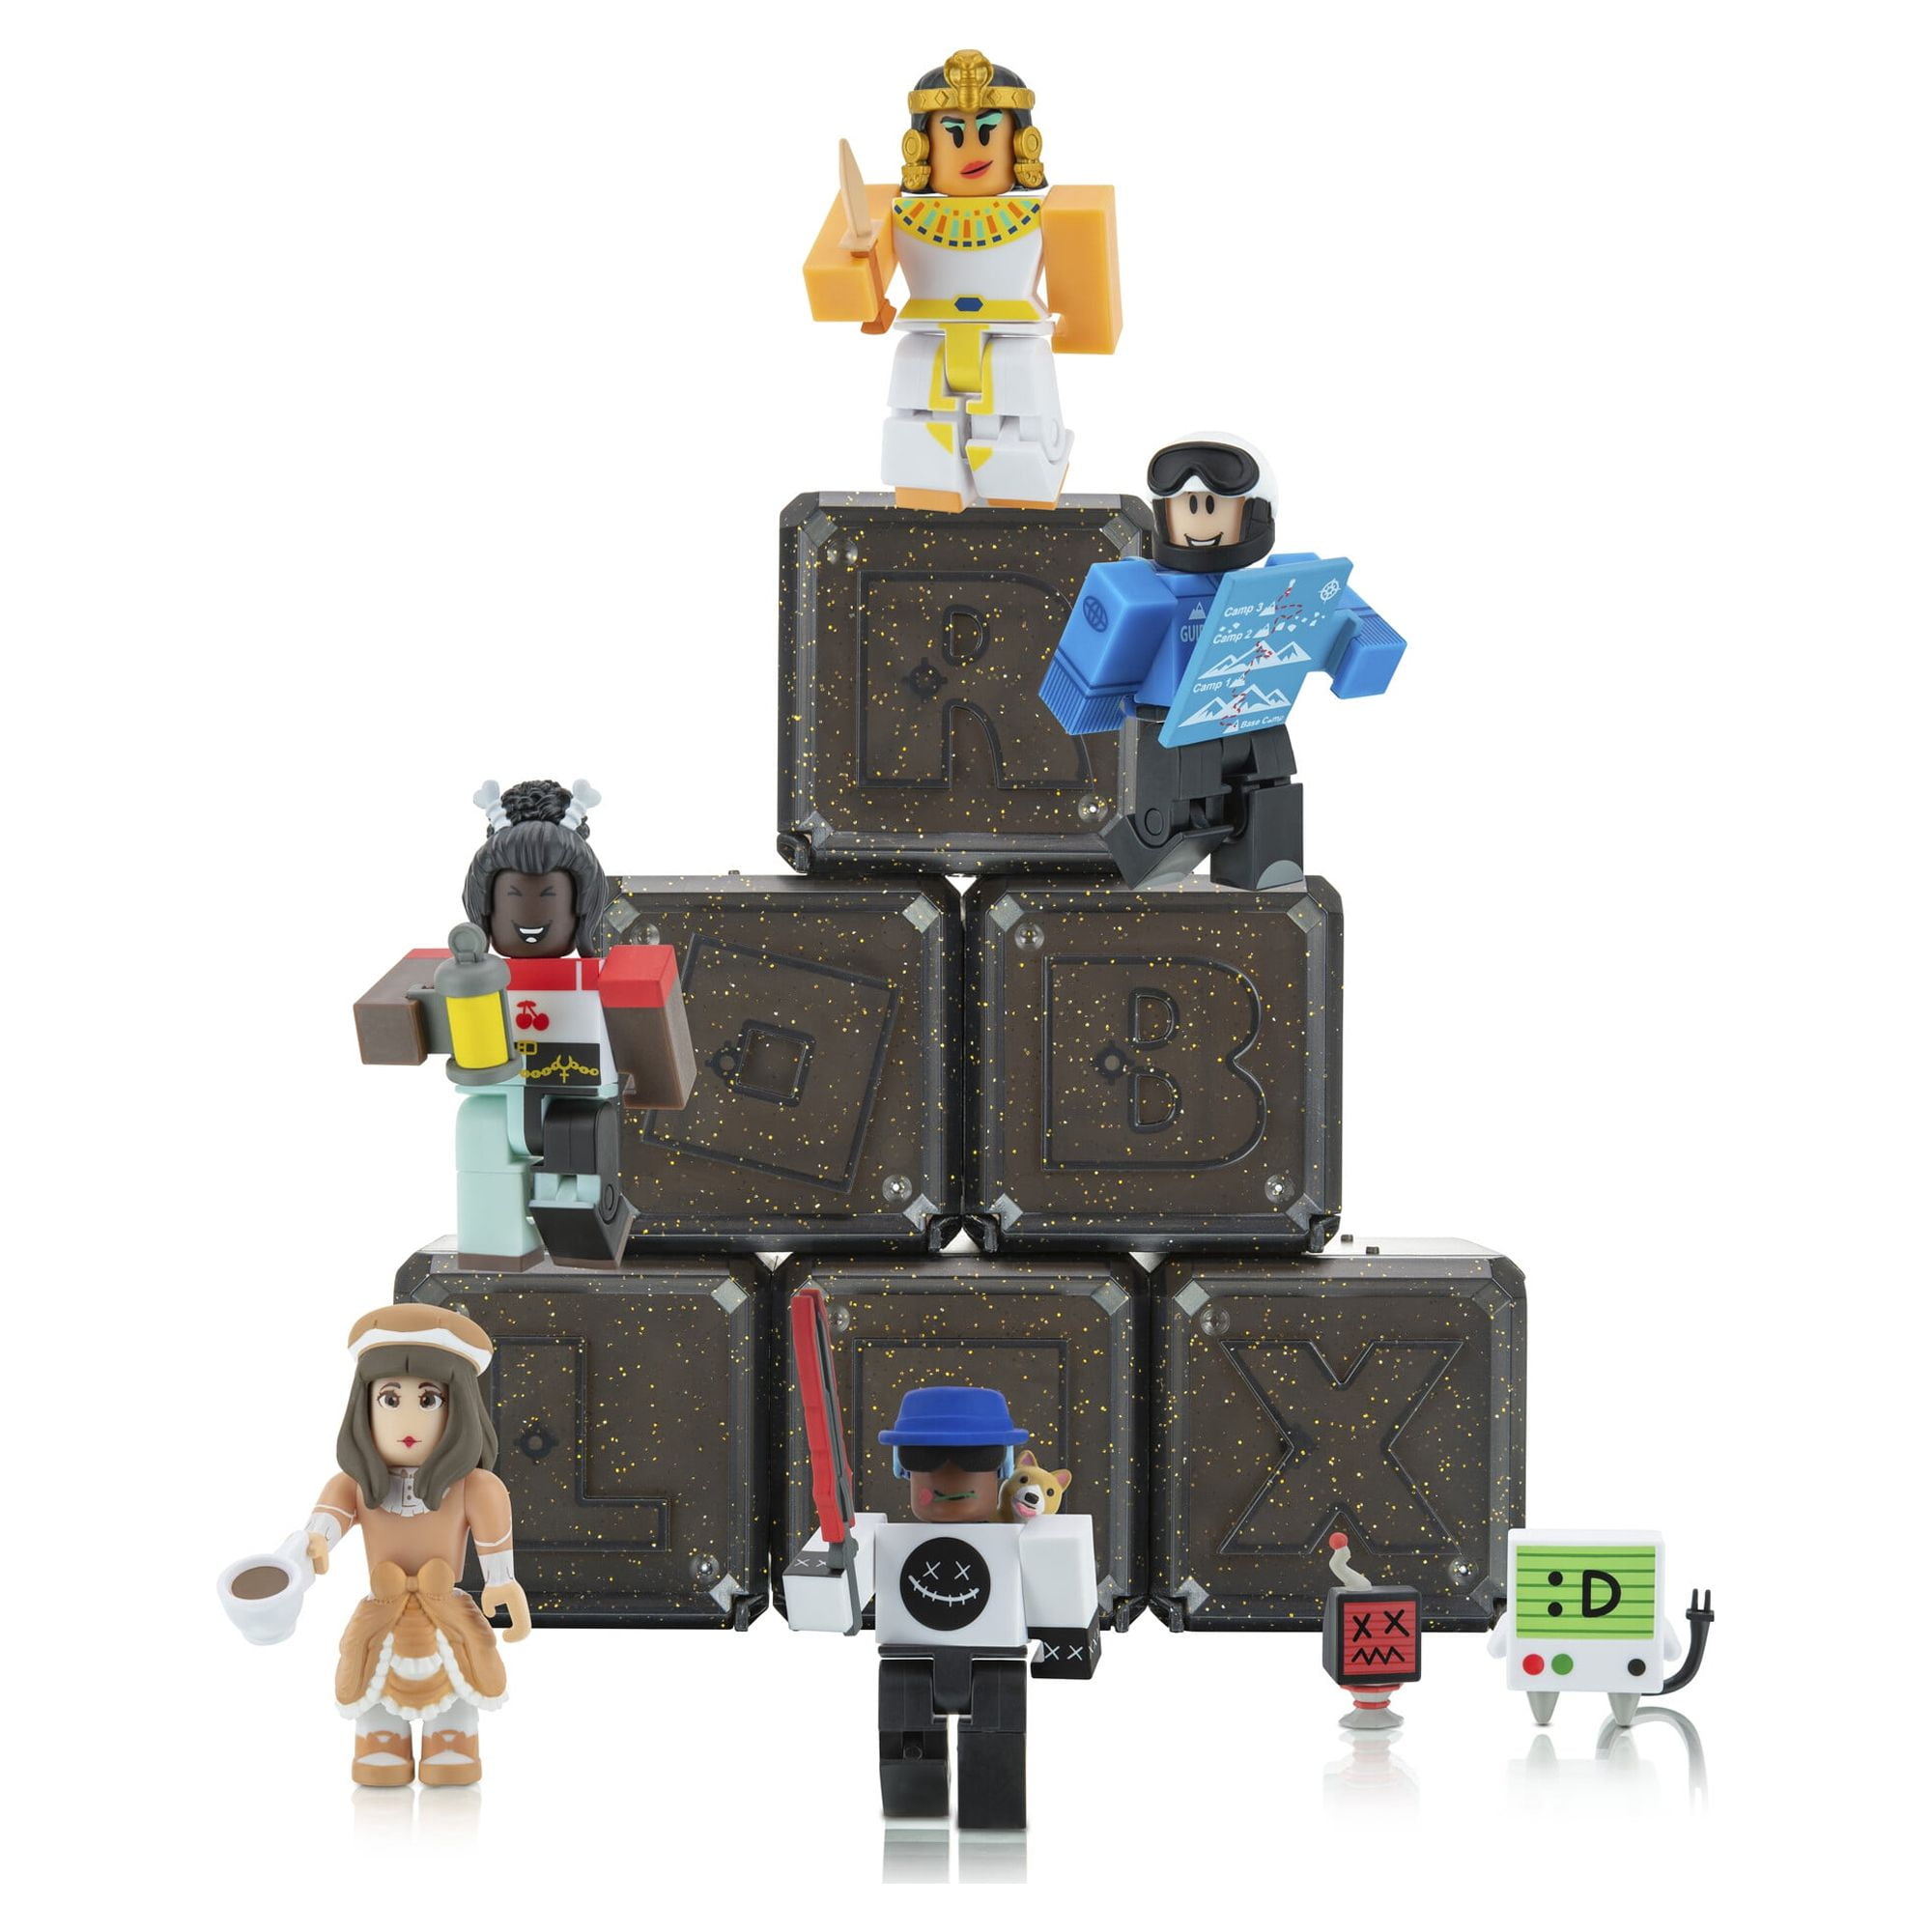  Roblox Celebrity Collection - Adopt Me: Pet Store Deluxe  Playset [Includes Exclusive Virtual Item] : Toys & Games